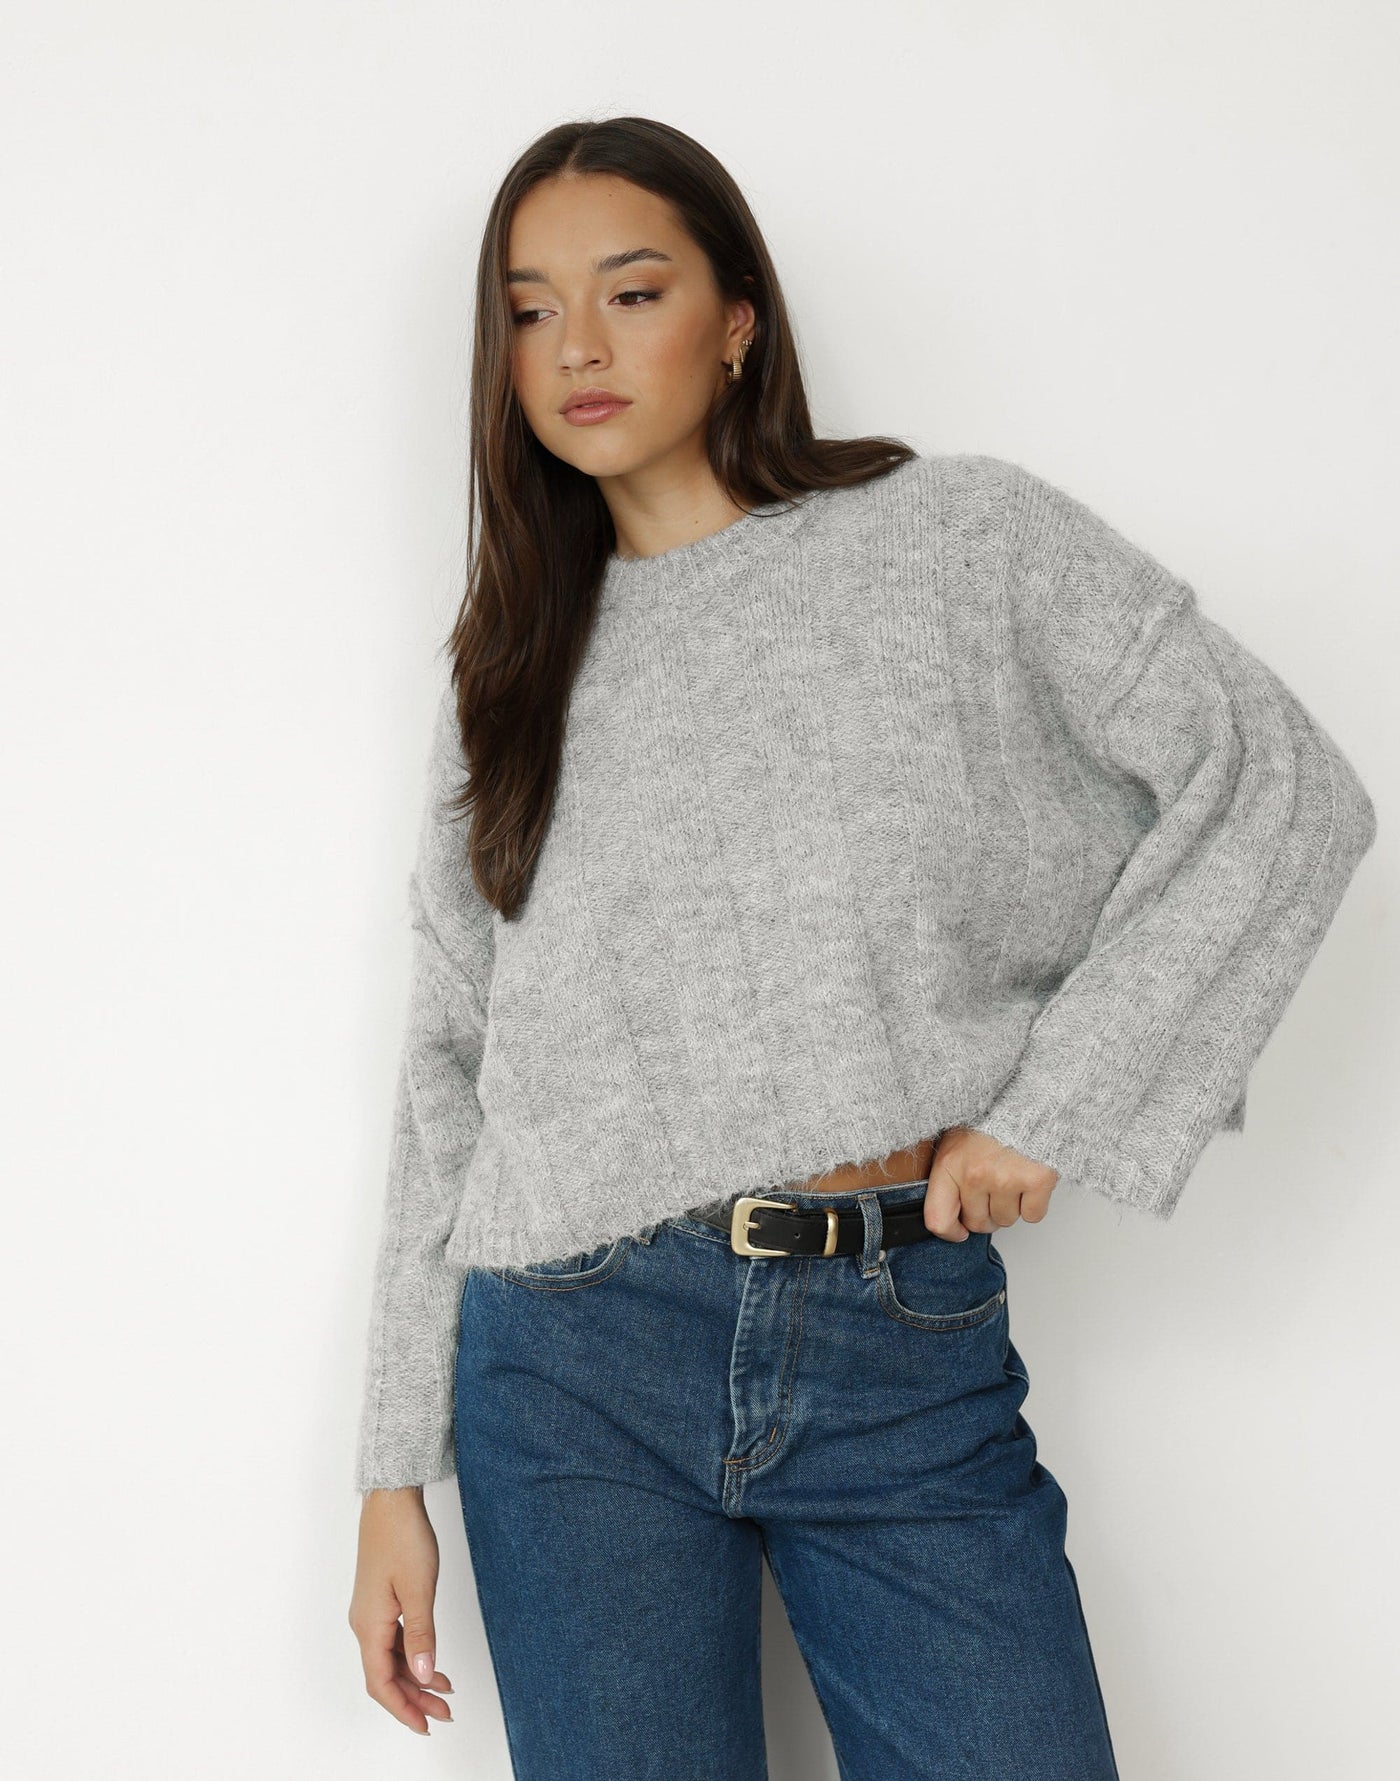 Katrin Jumper (Grey Marle) - Fuzzy Ribbed Crew Neck Jumper - Women's Top - Charcoal Clothing